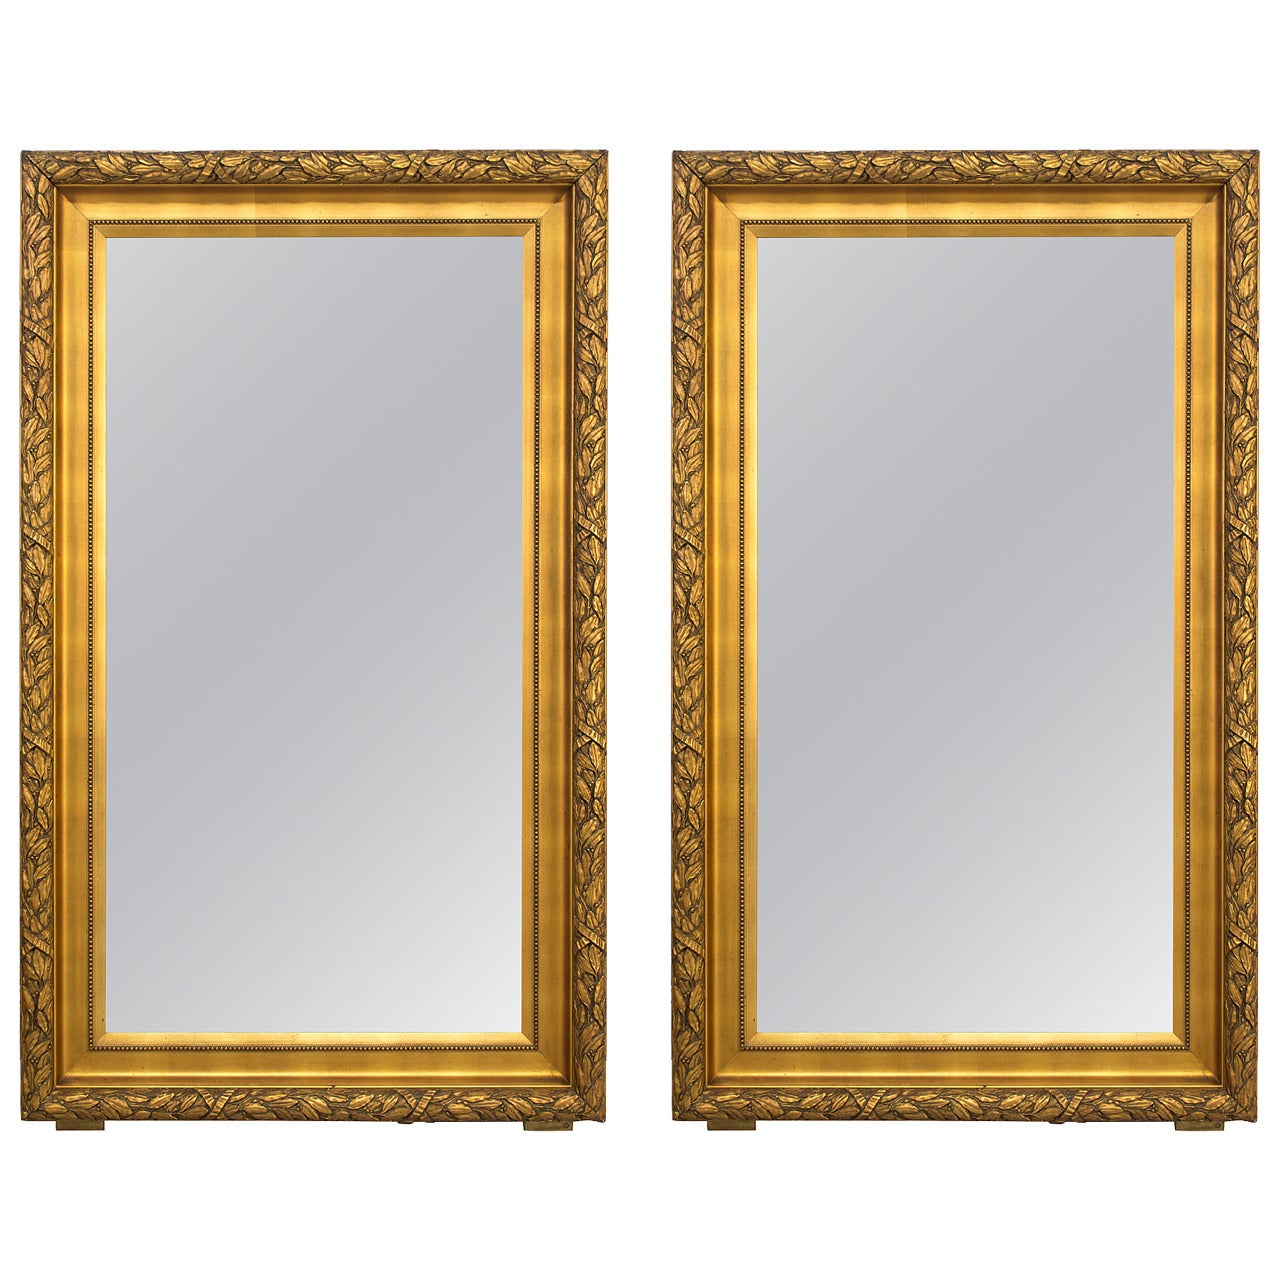 Similar Pair of Large French Giltwood Mirrors